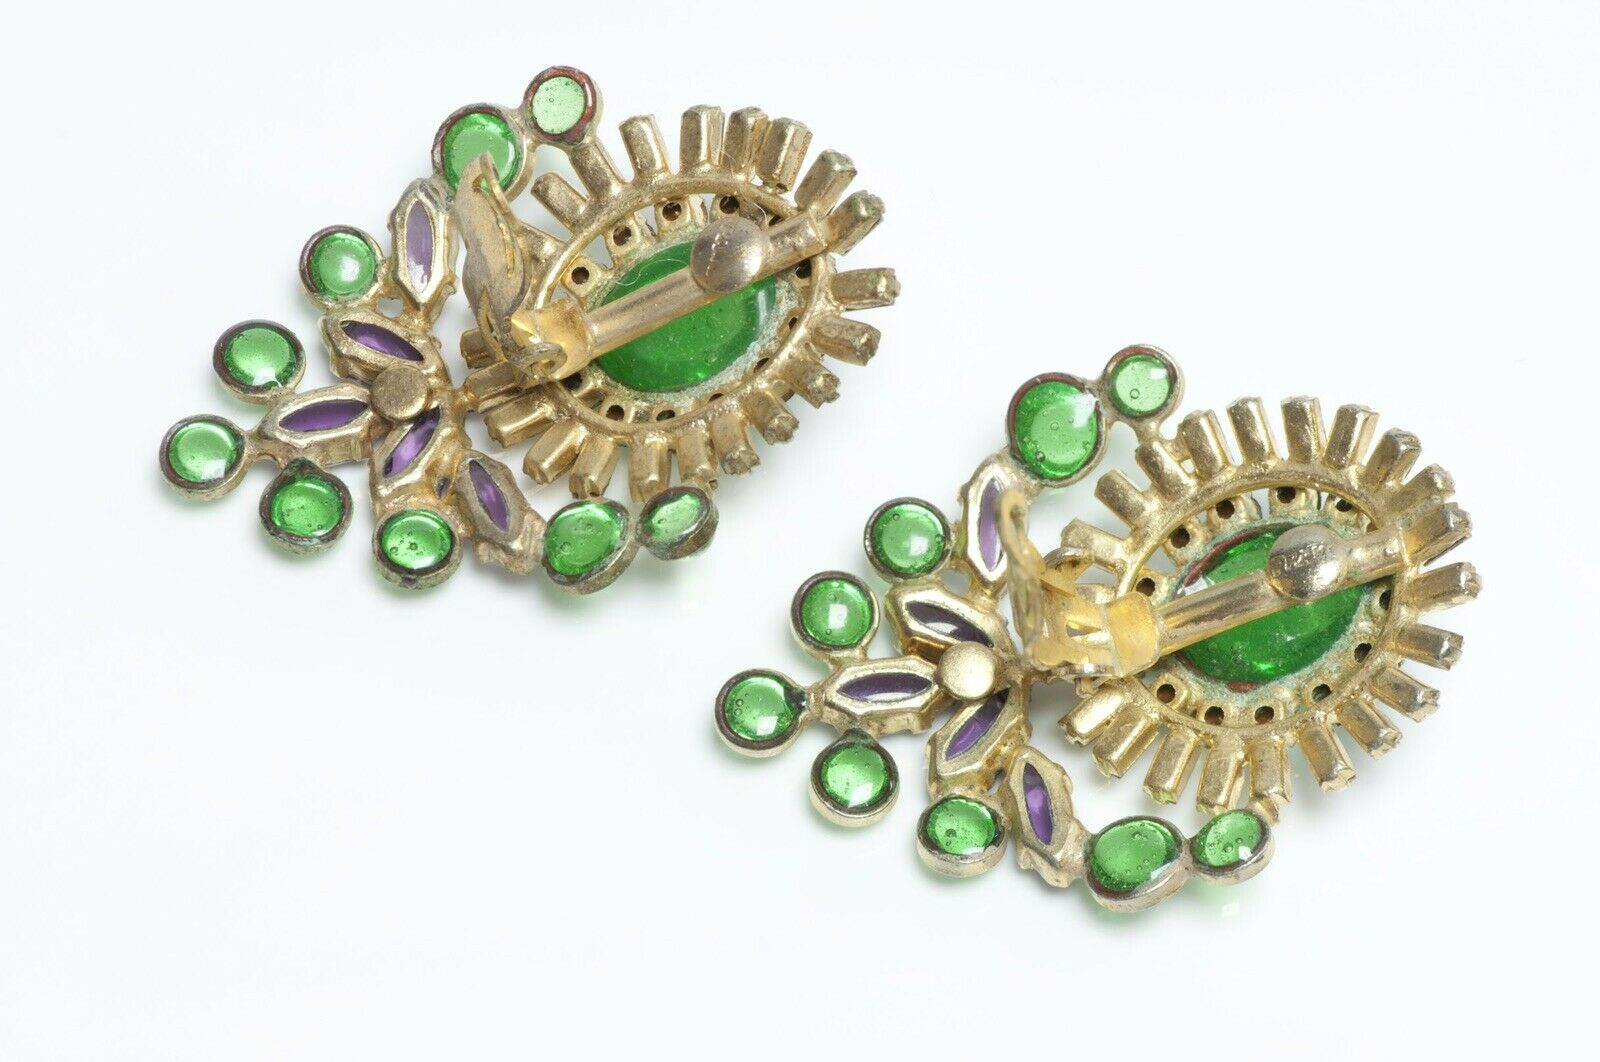 Coco CHANEL 1950’s Maison Gripoix Green Purple Cabochon Glass Crystal Earrings